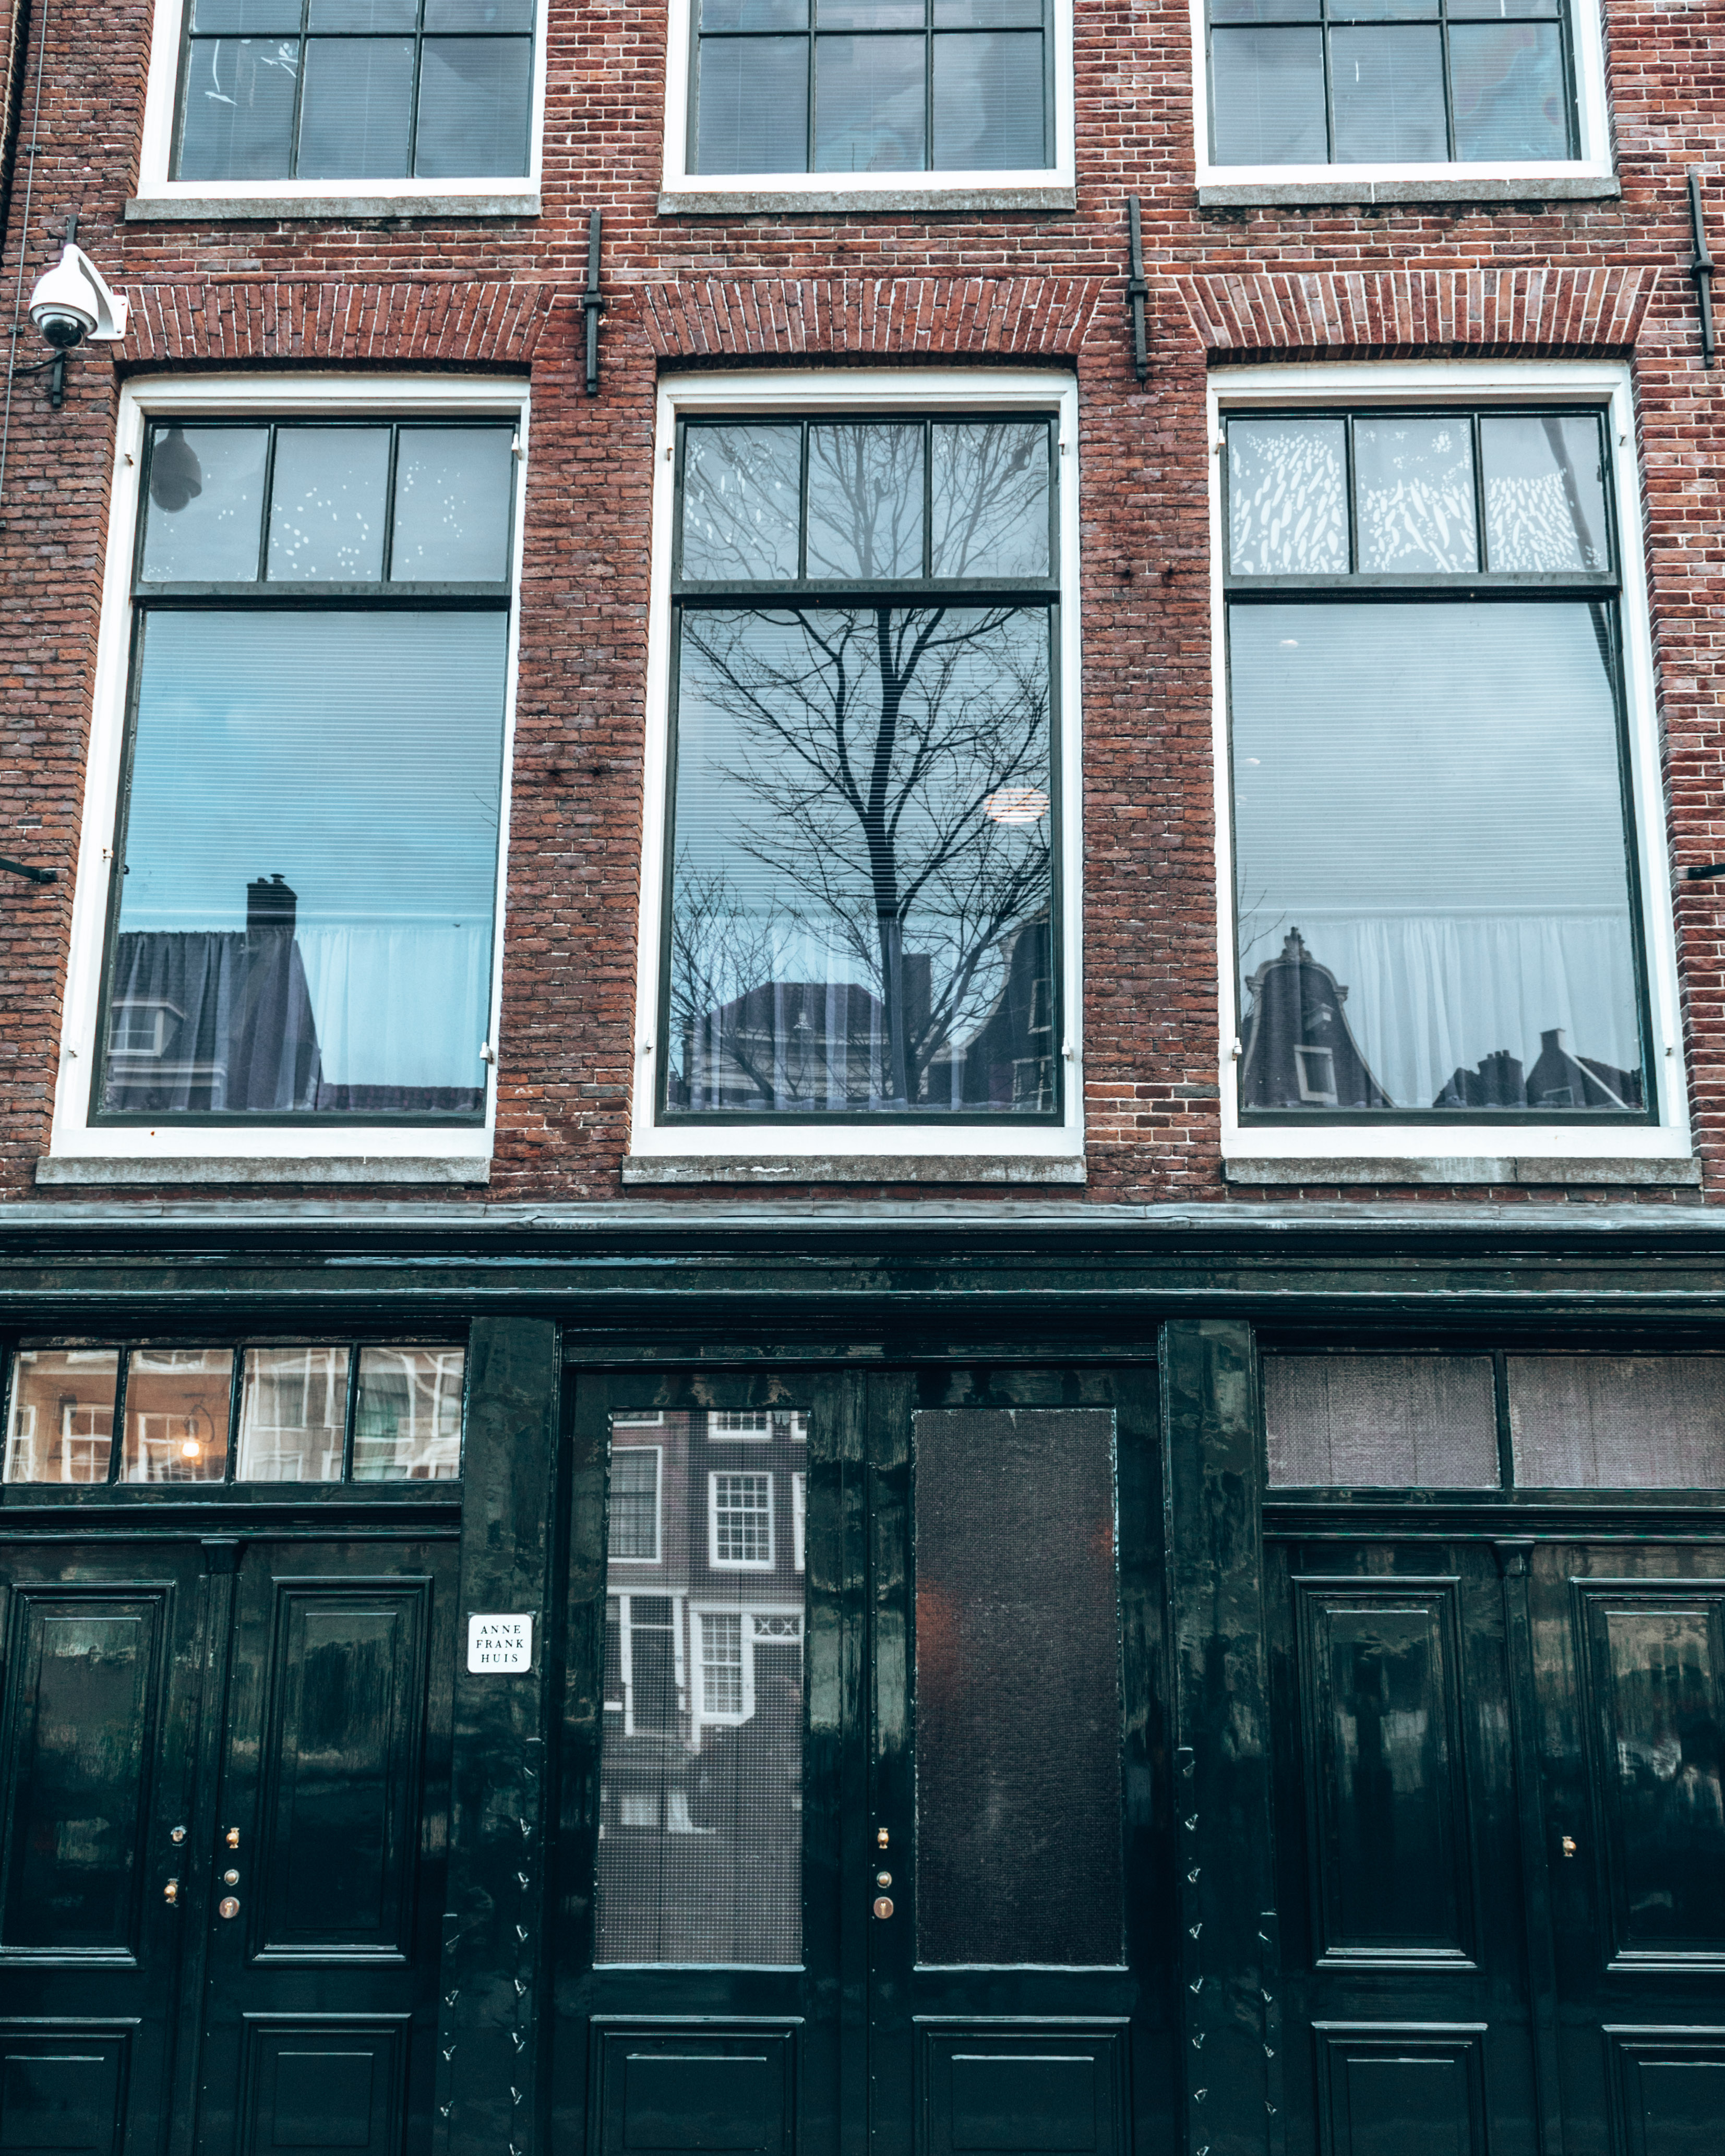 The Anne Frank house in Amsterdam, Netherlands